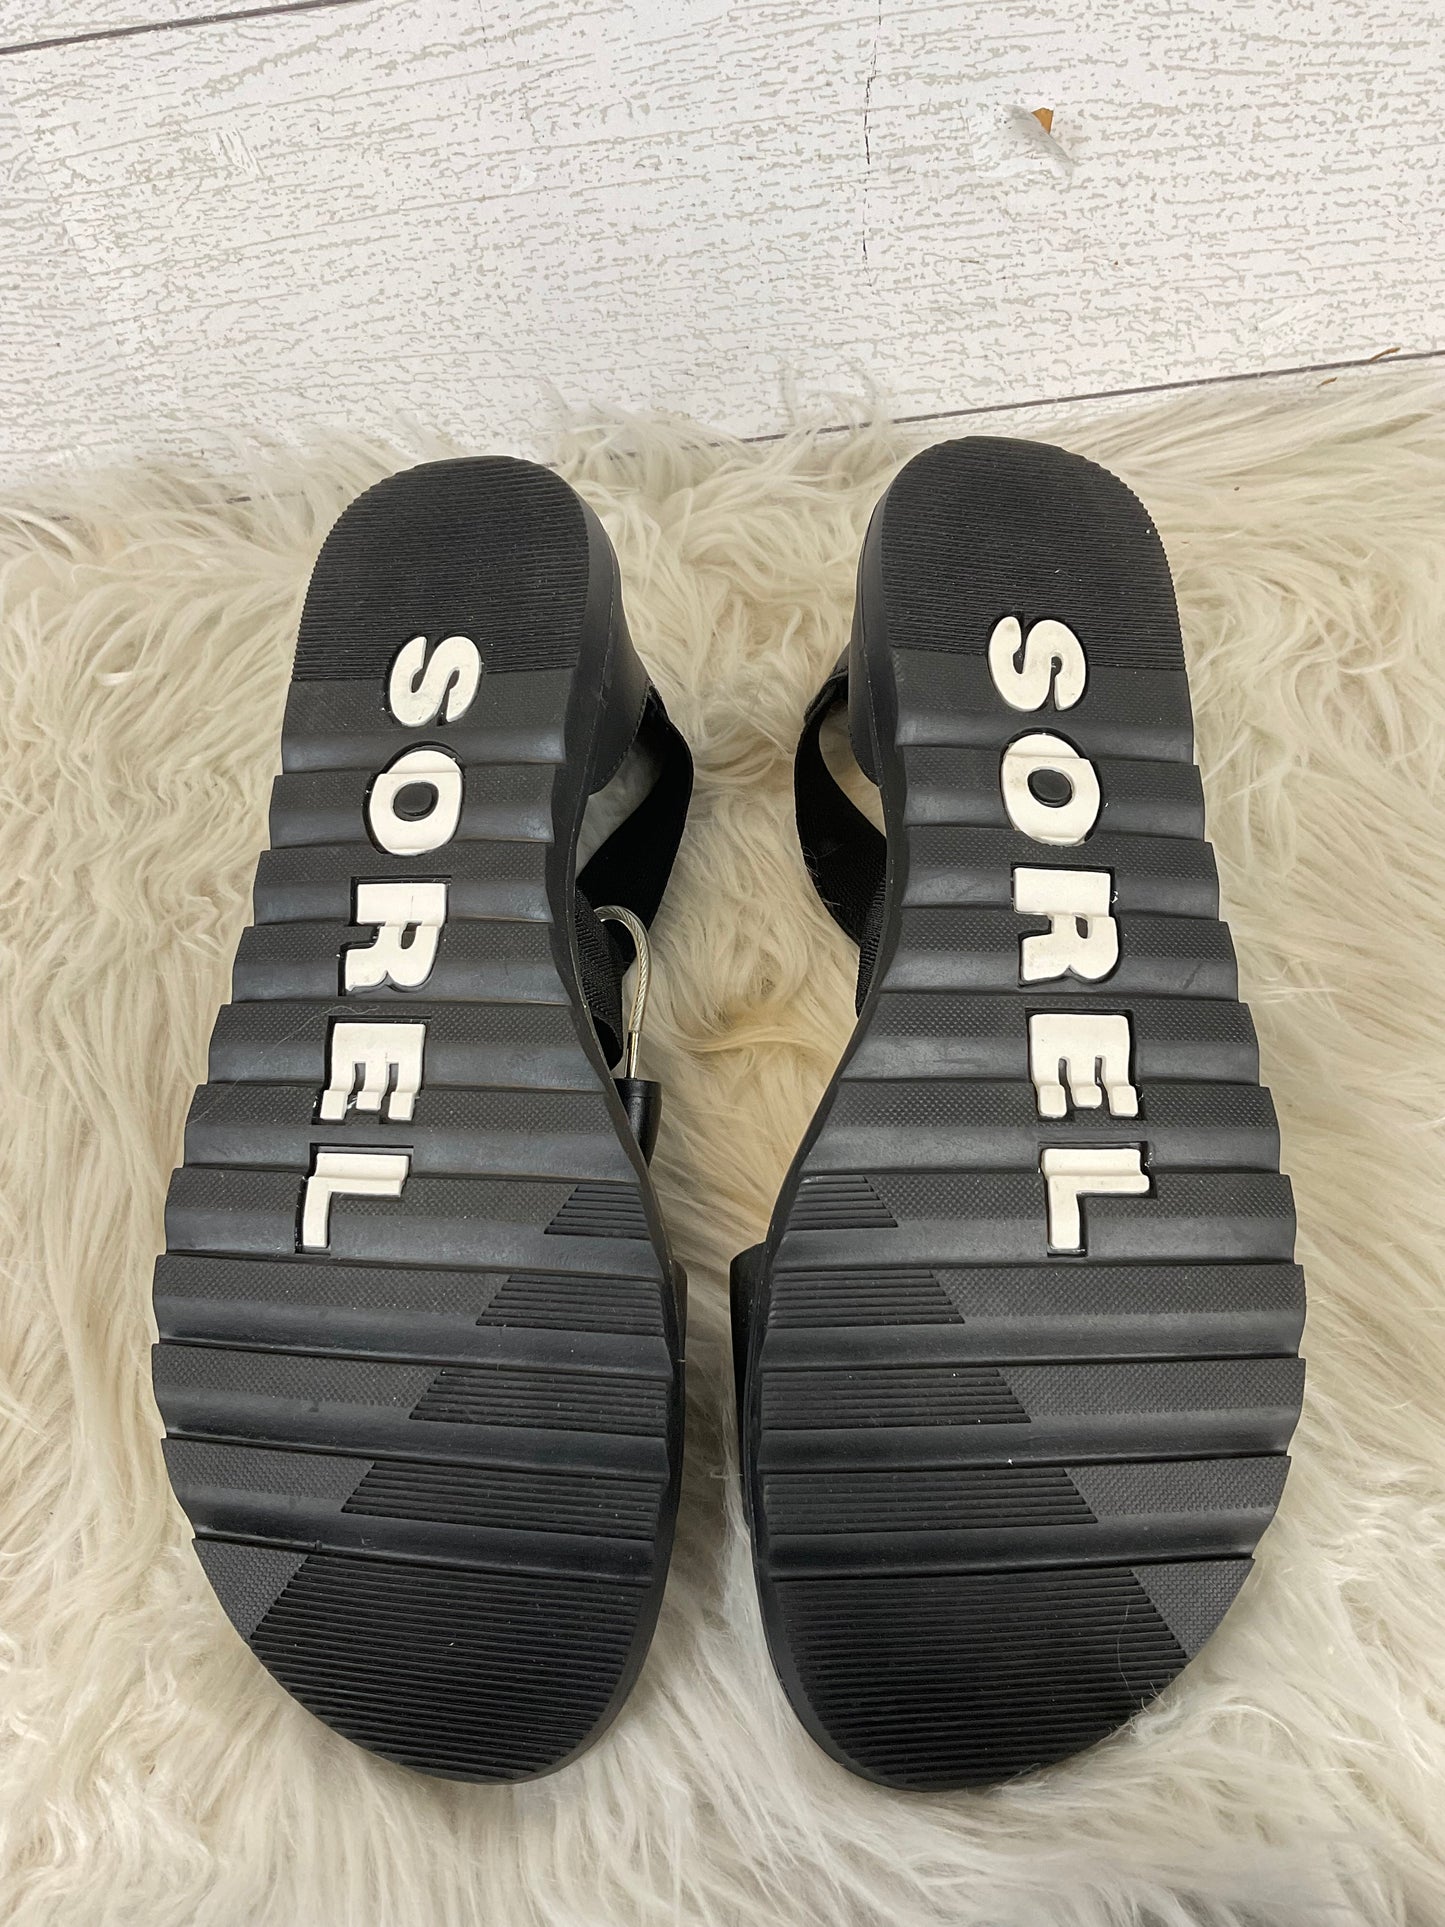 Sandals Flats By Sorel  Size: 7.5